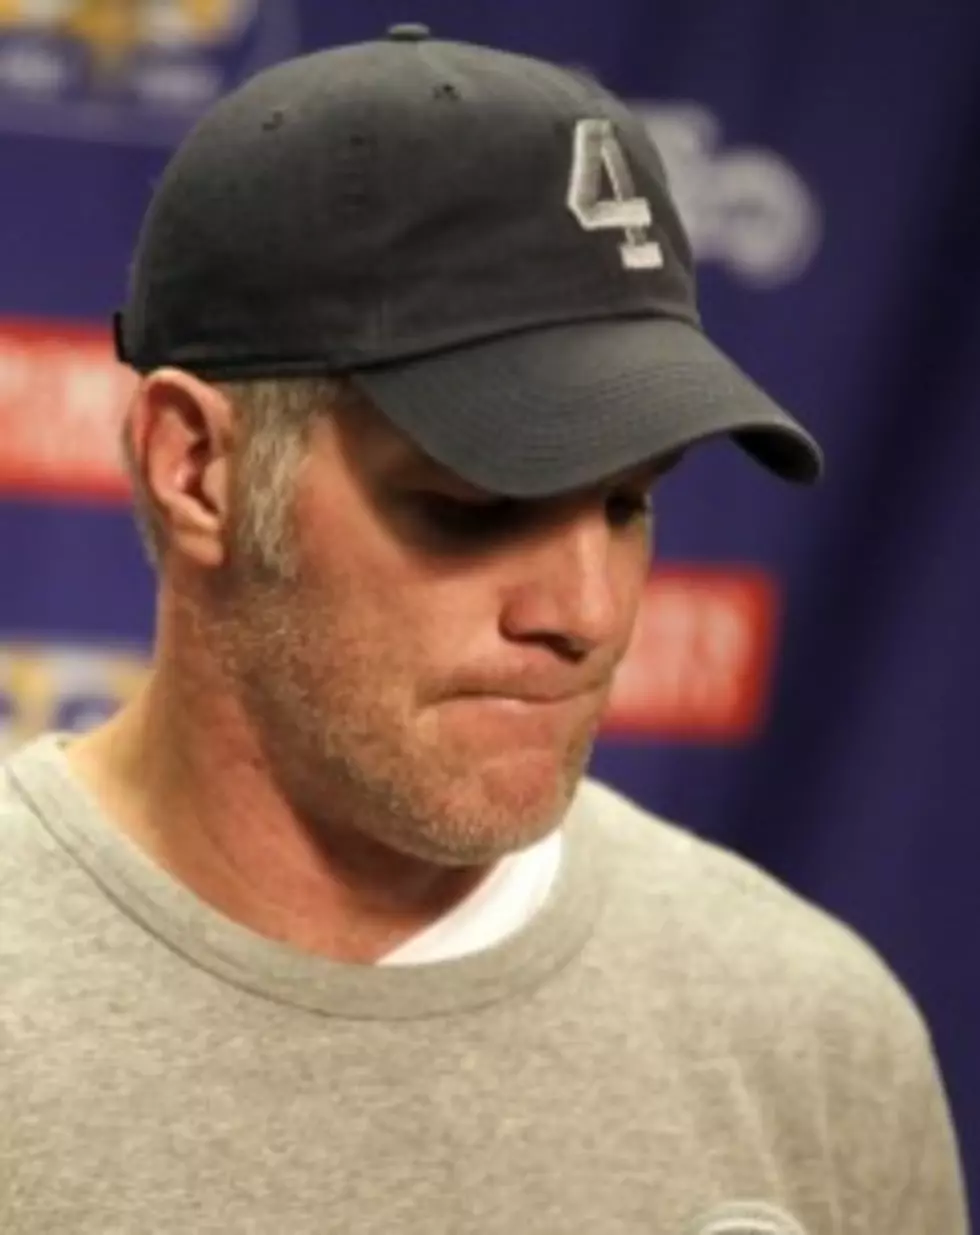 Brett Favre To Play For Miami Dolphins?